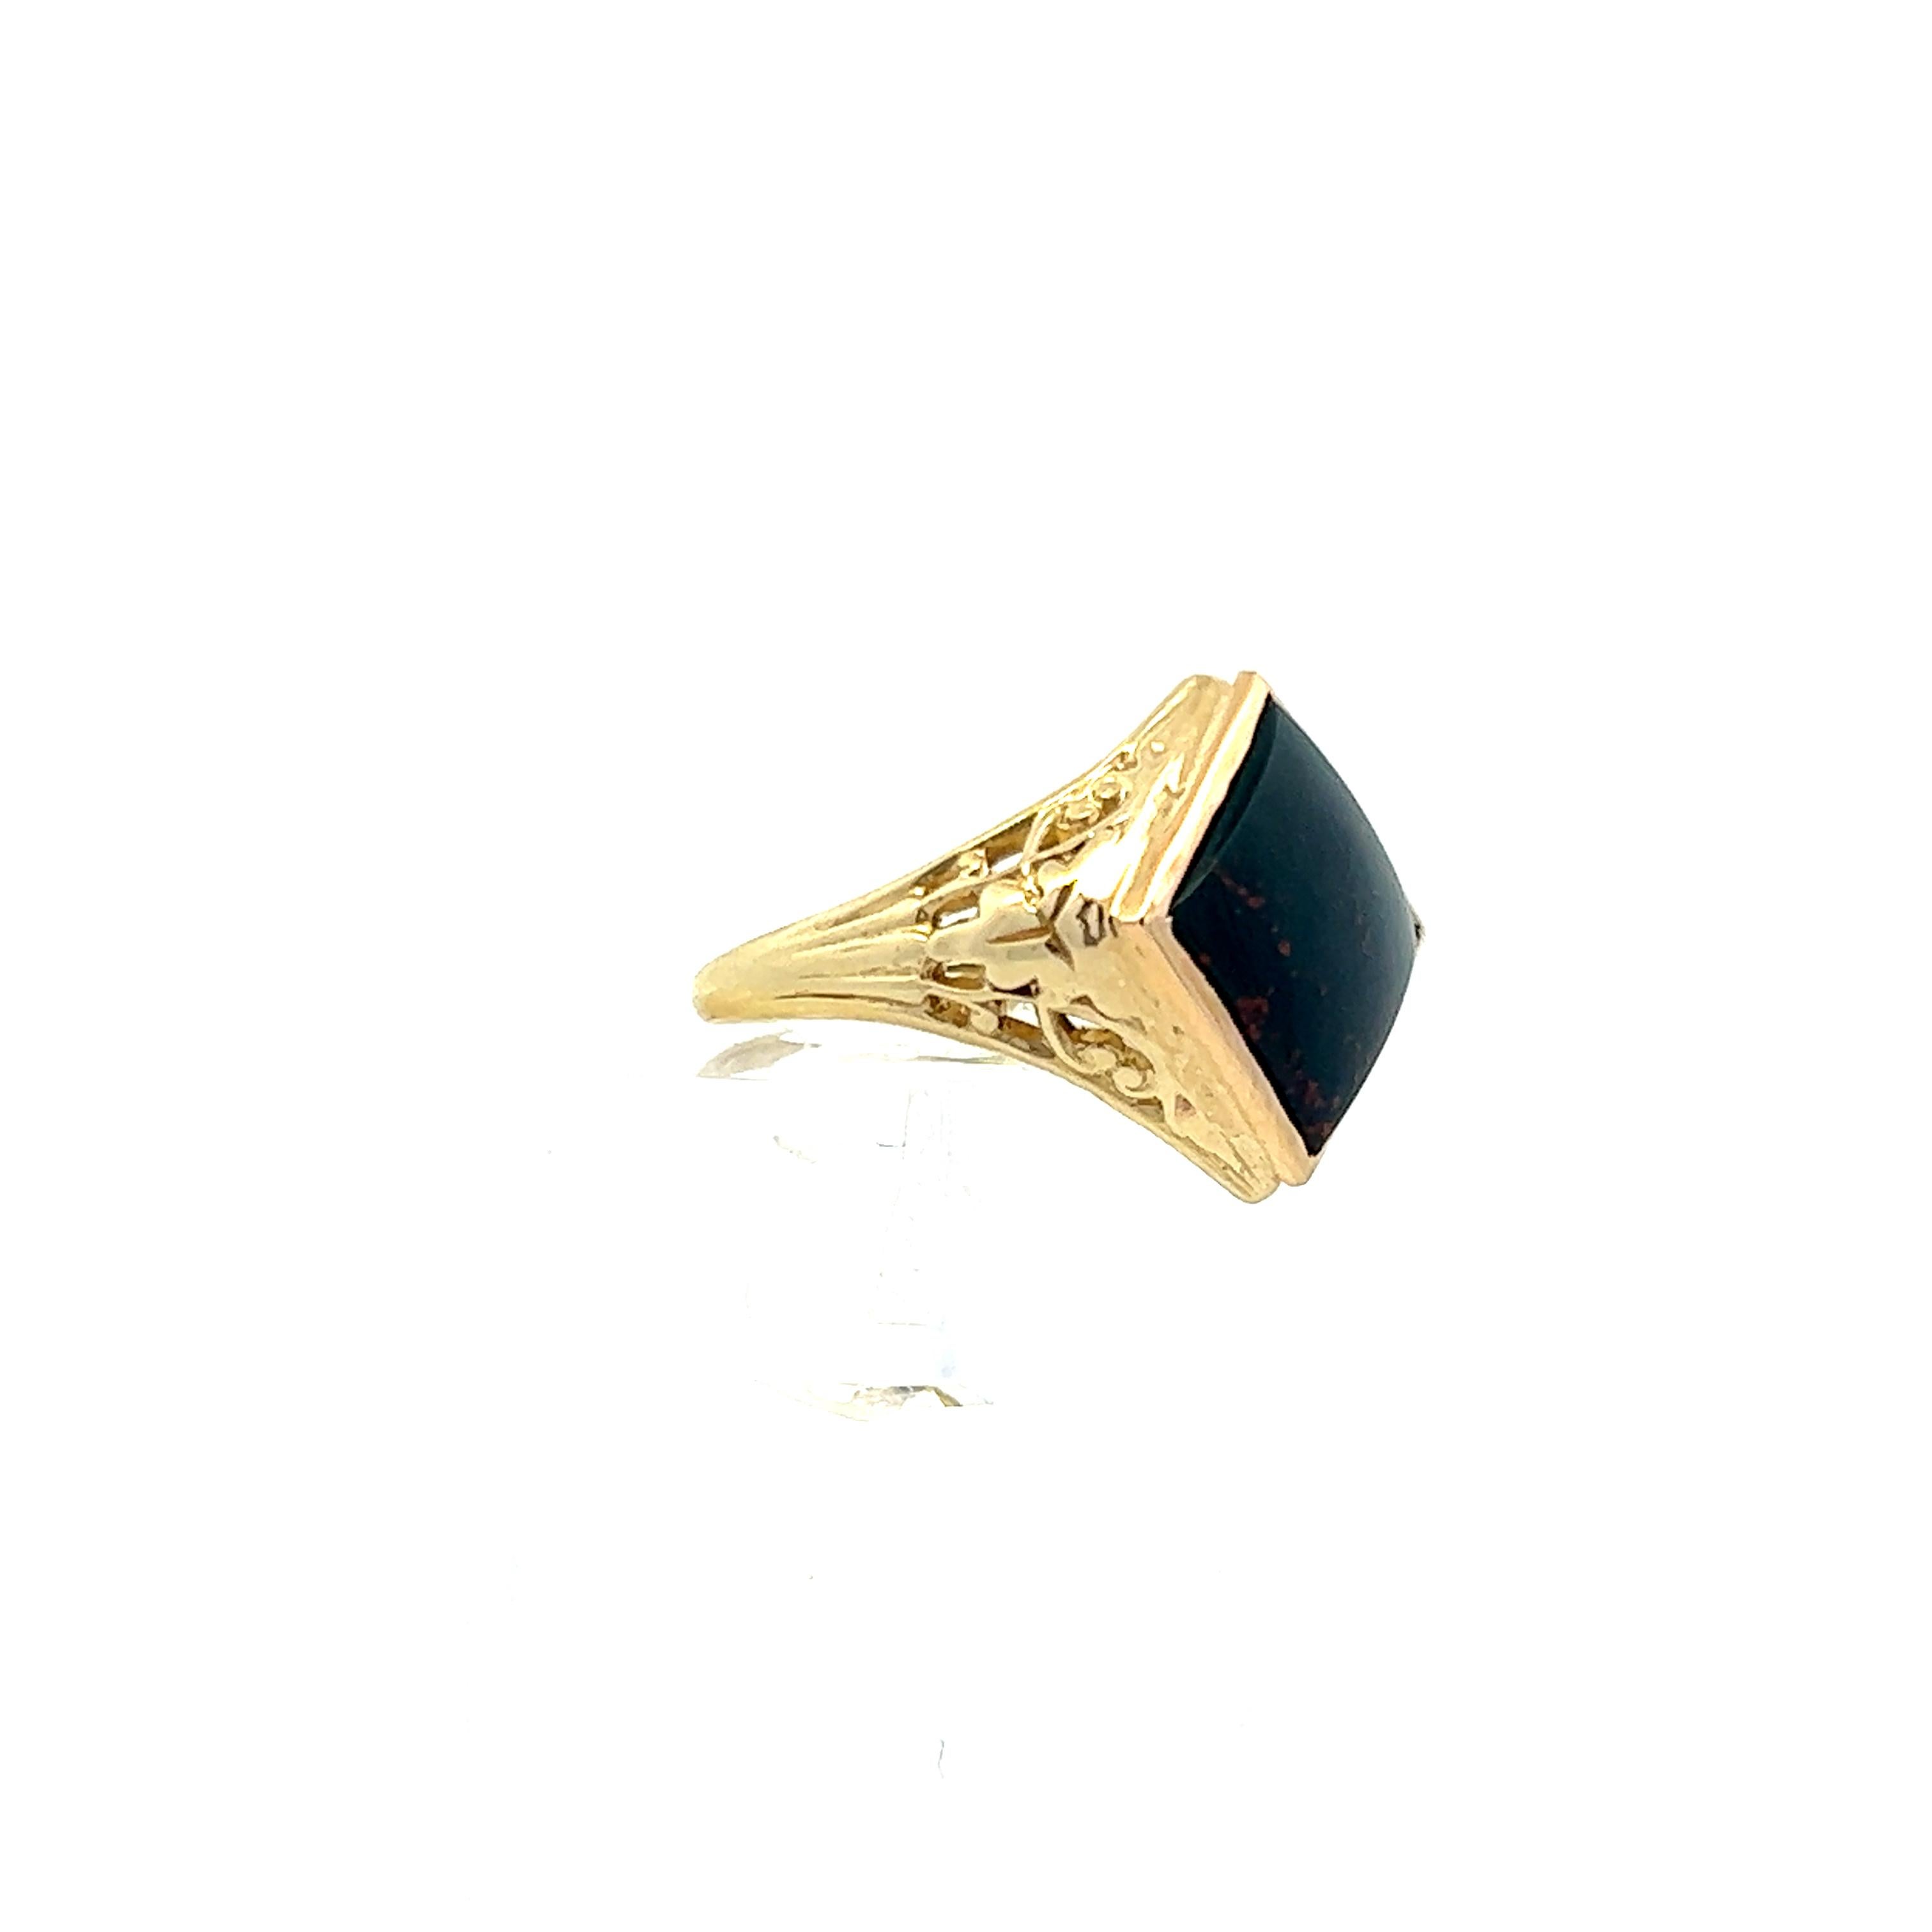 This elegant ring is a 1920s bloodstone Edwardian gold filigree ring. The ring features a large, square cut, bloodstone cabochon as the center stone with beautiful gold filigree sides. The combination of dark green bloodstone and gold is simple yet